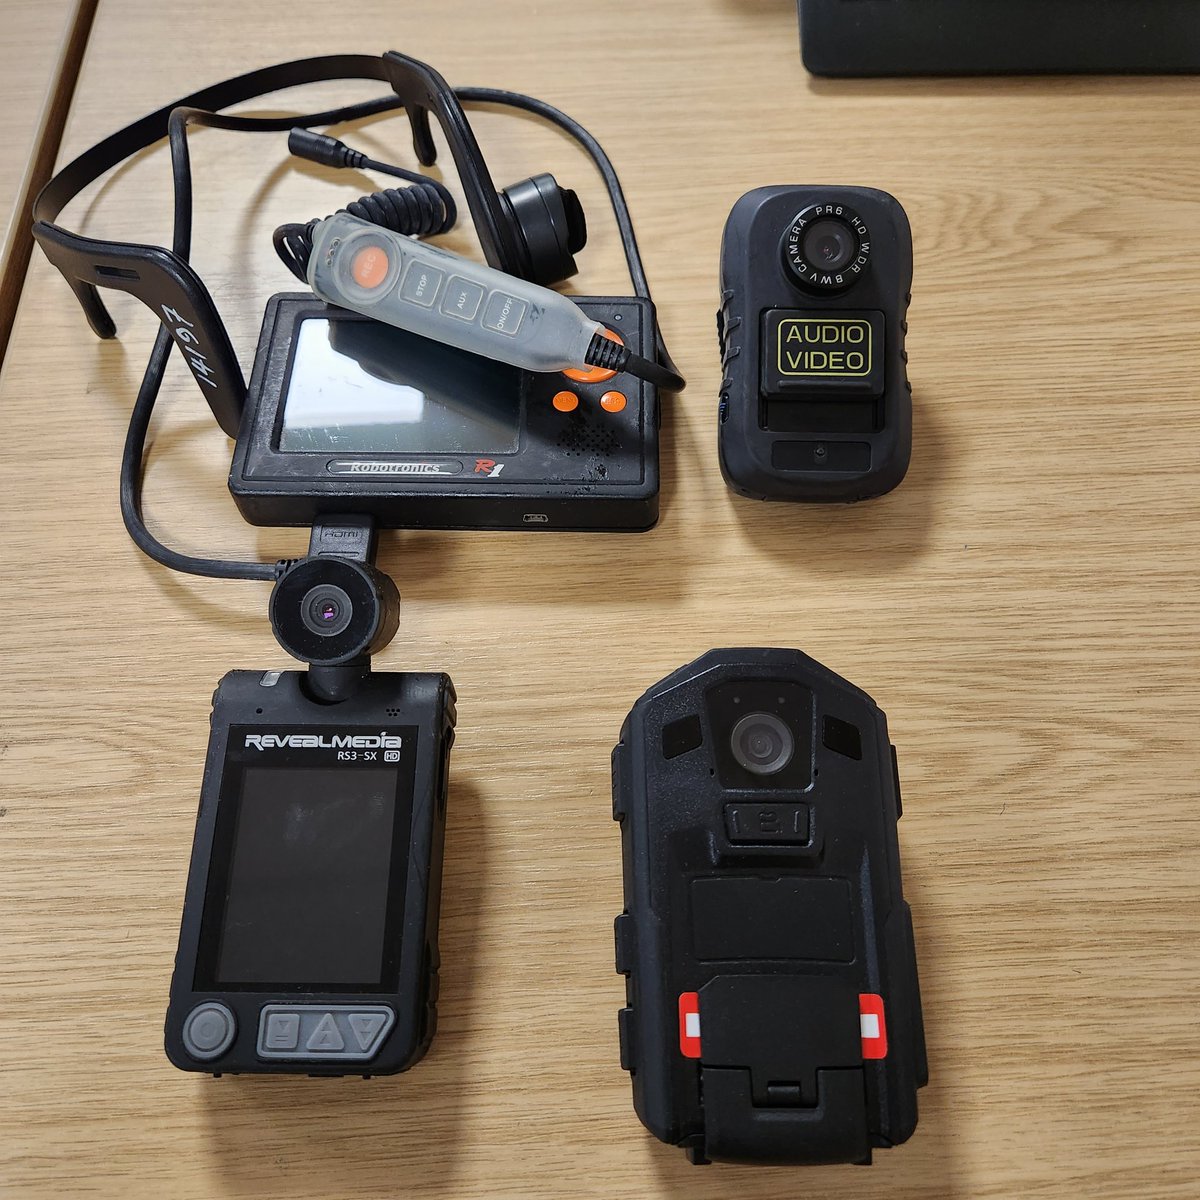 Discovered a generation of #BodyWornVideo cameras I've used/trialled over 10 years 😅🎥

@Northants_RPU will remember the top left one after a pursuit I didn't record as I had taken the headband off for a break, then lost it under the seat 🙄